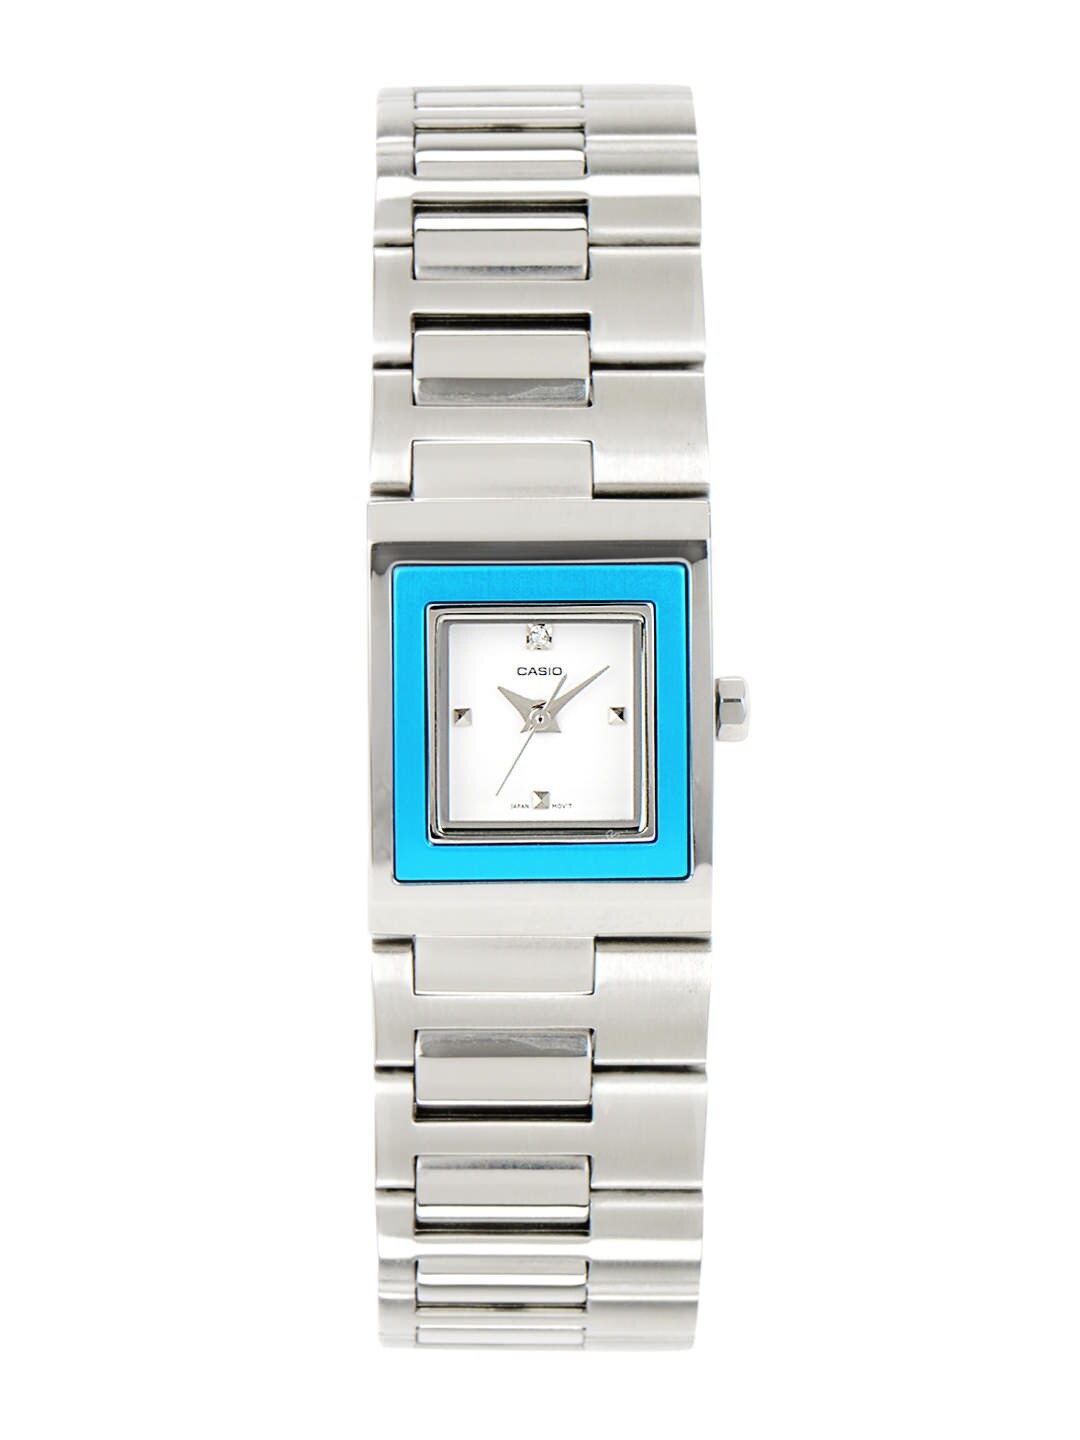 CASIO ENTICER Women White Dial Analogue Watch A665